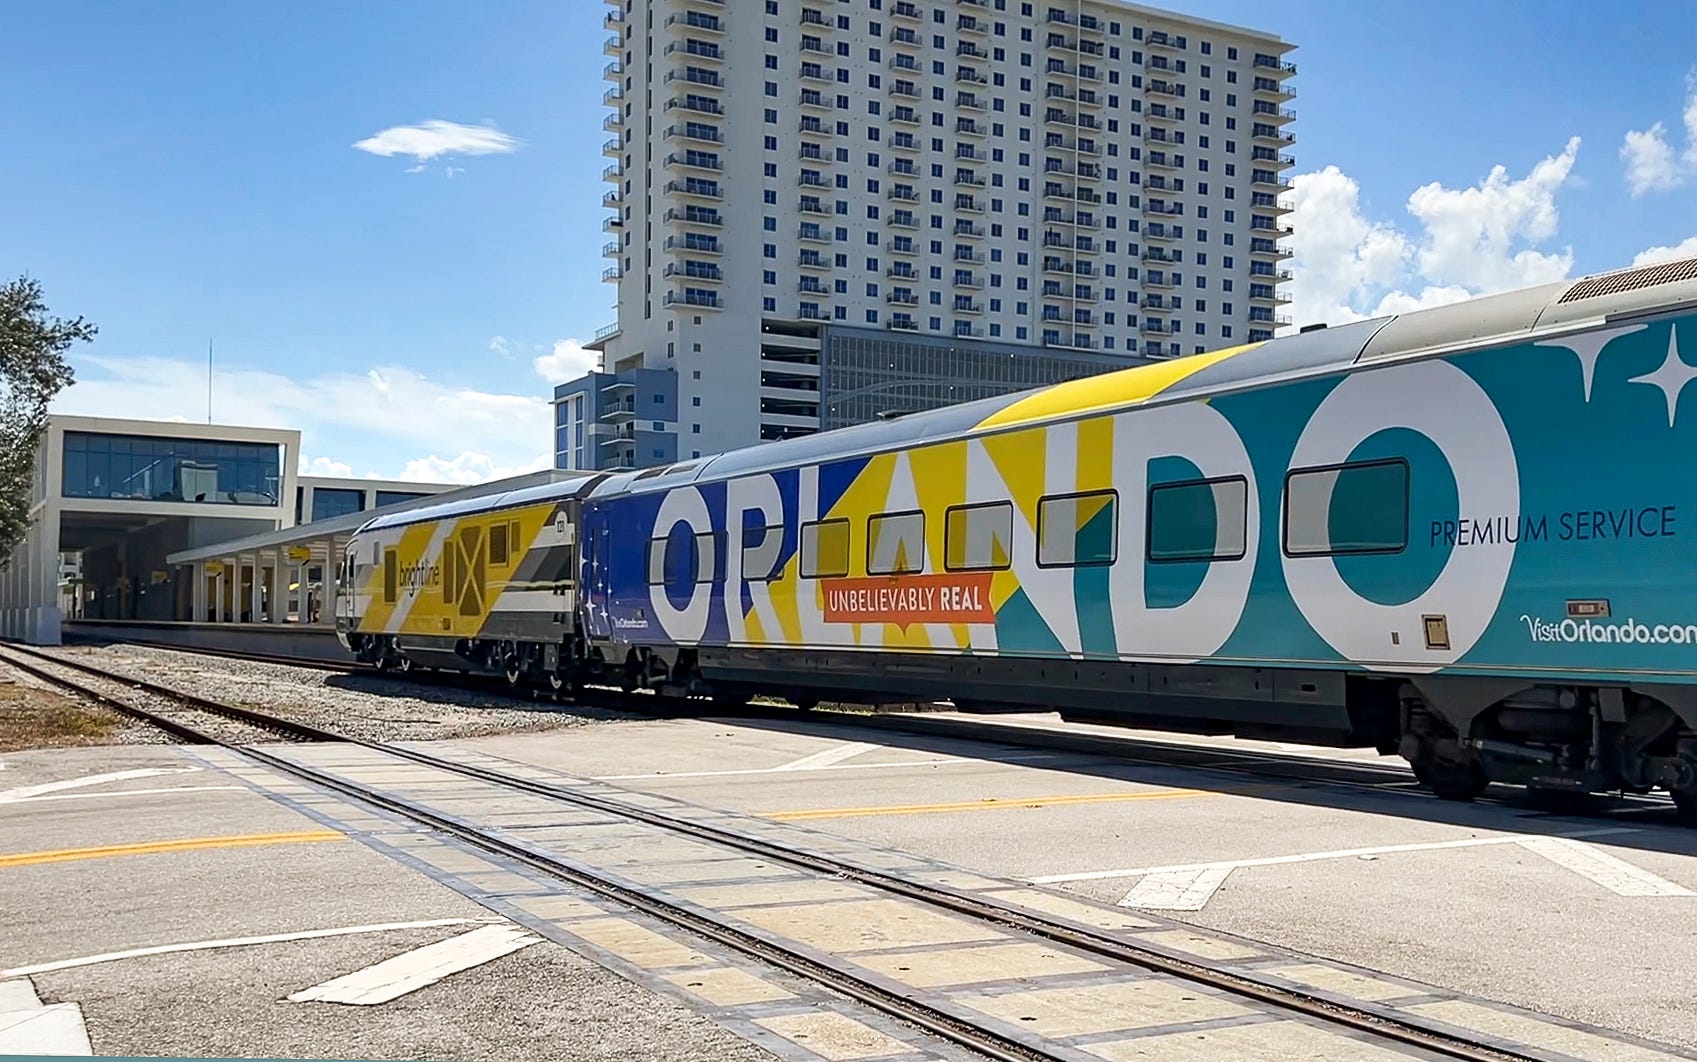 Train kills one person on first day of Orlando service